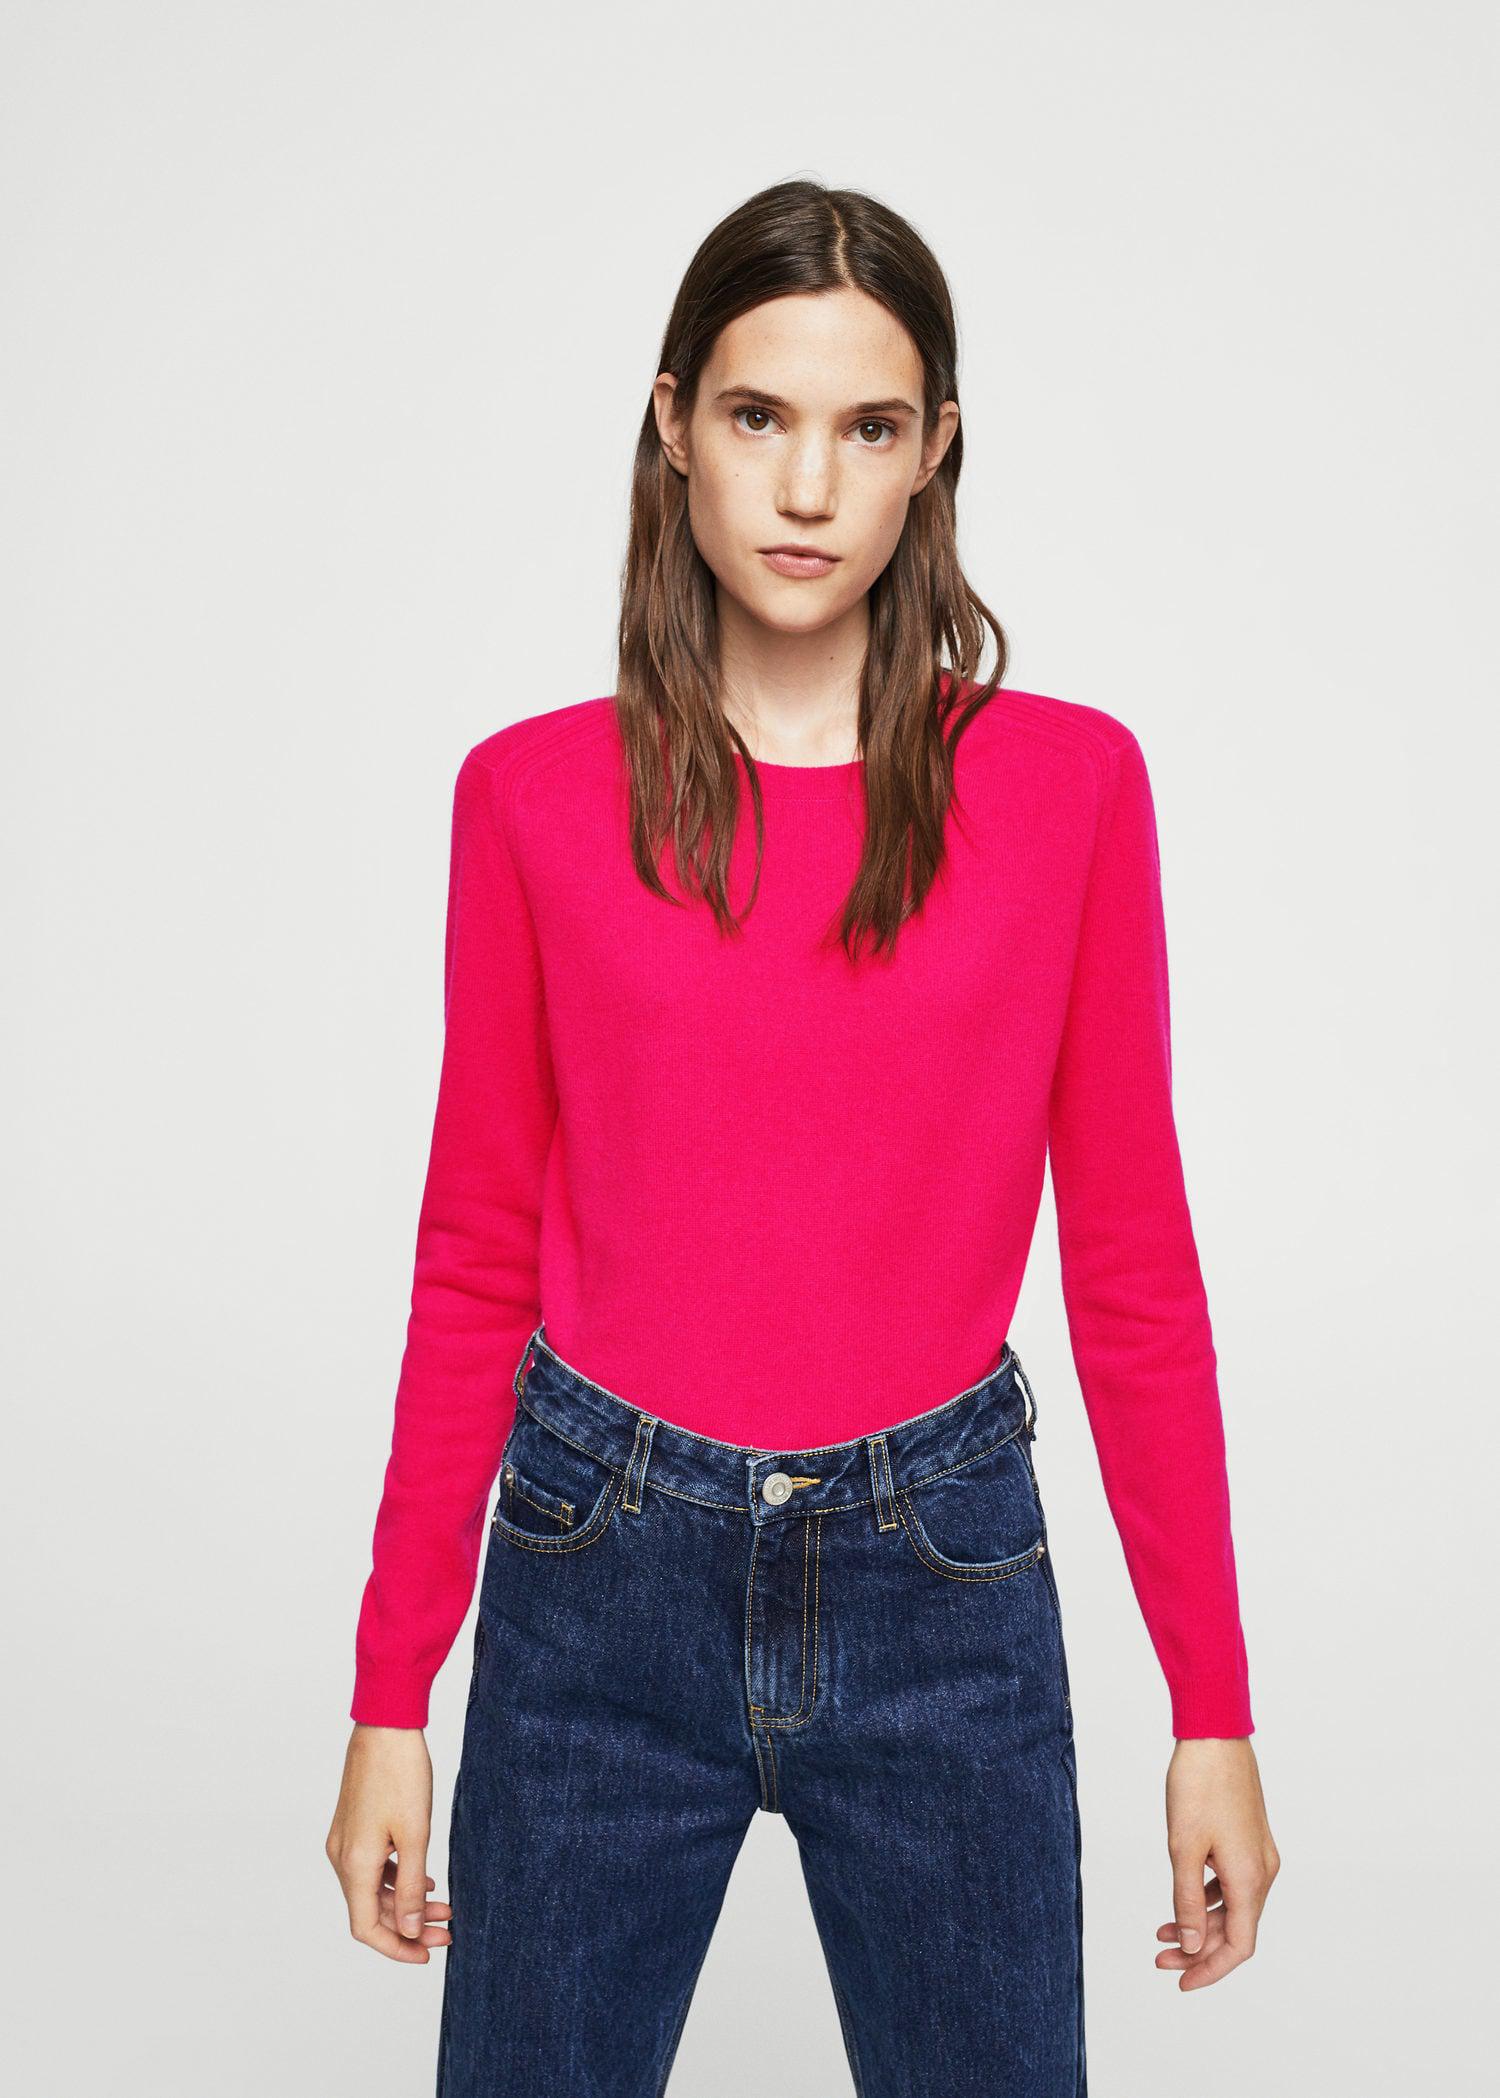 Lyst - Mango 100% Cashmere Sweater in Pink